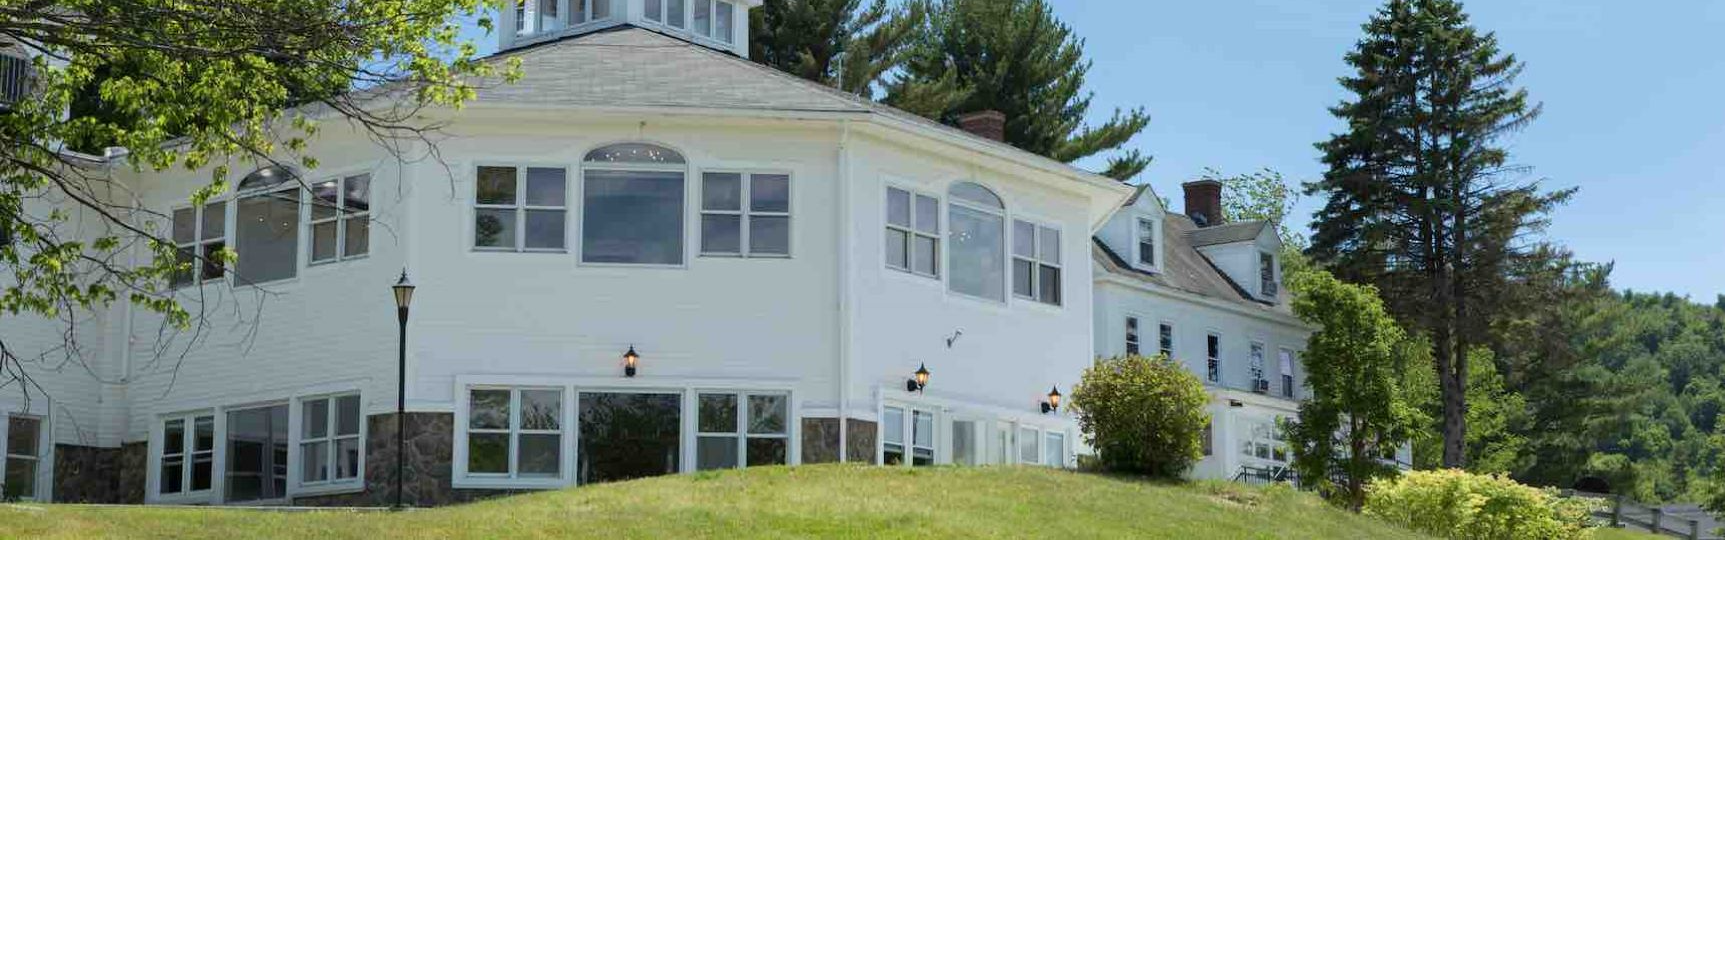 Green Mountain Treatment Center - Inpatient Drug Detox & Alcohol Rehab 244 High Watch Rd, Effingham New Hampshire 03882